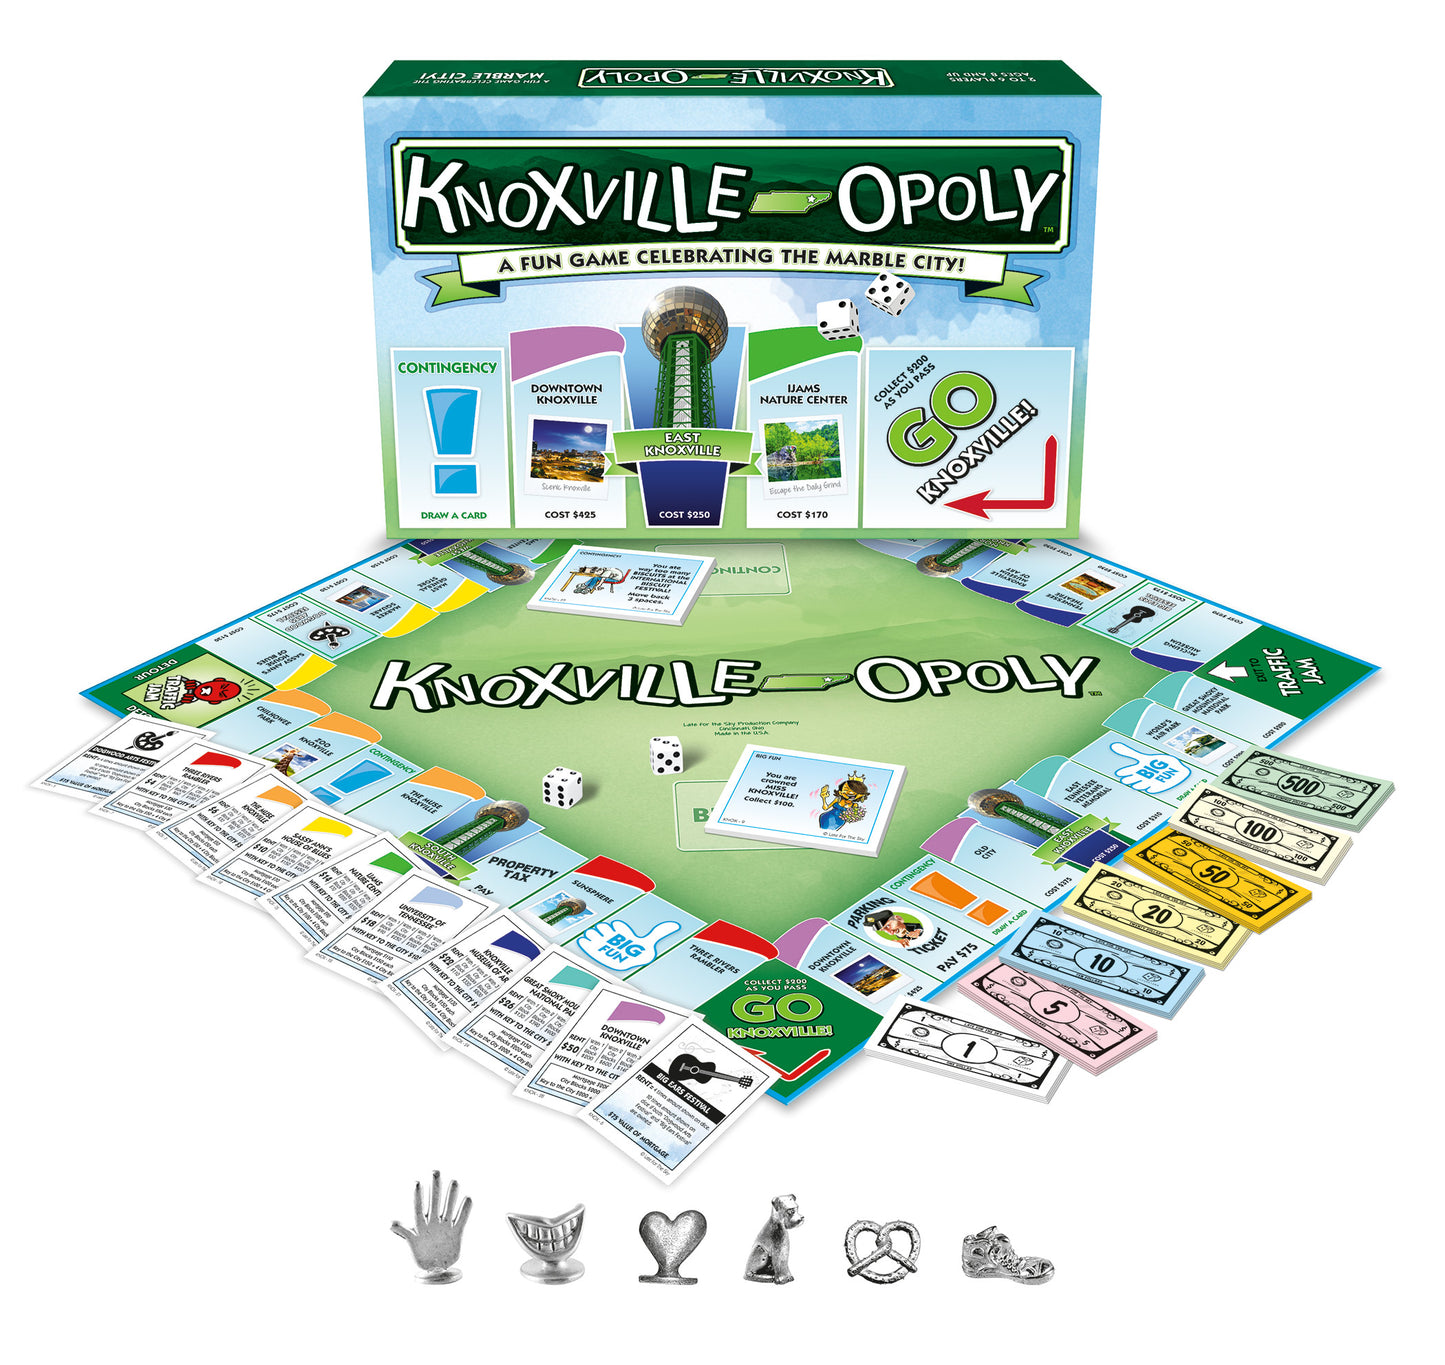 Knoxville-Opoly